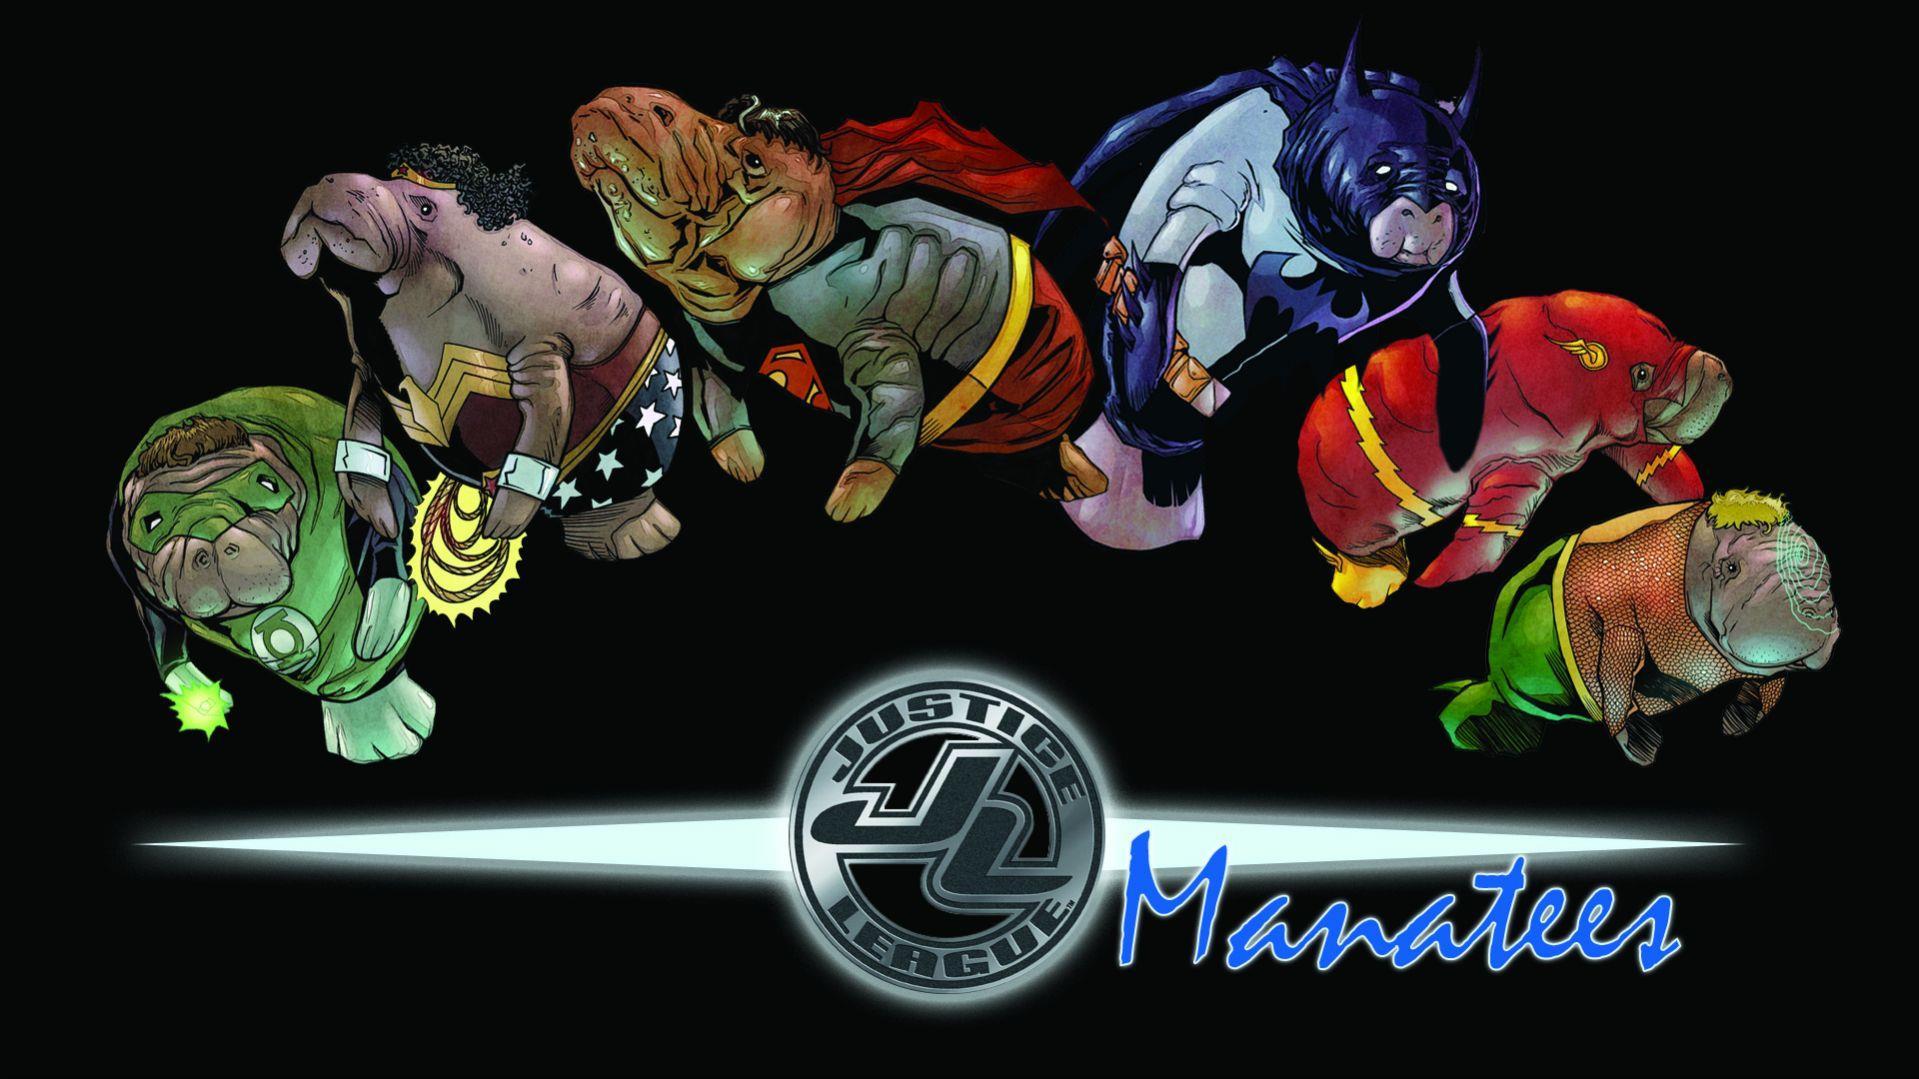 I put together some wallpaper with the manatee superheroes